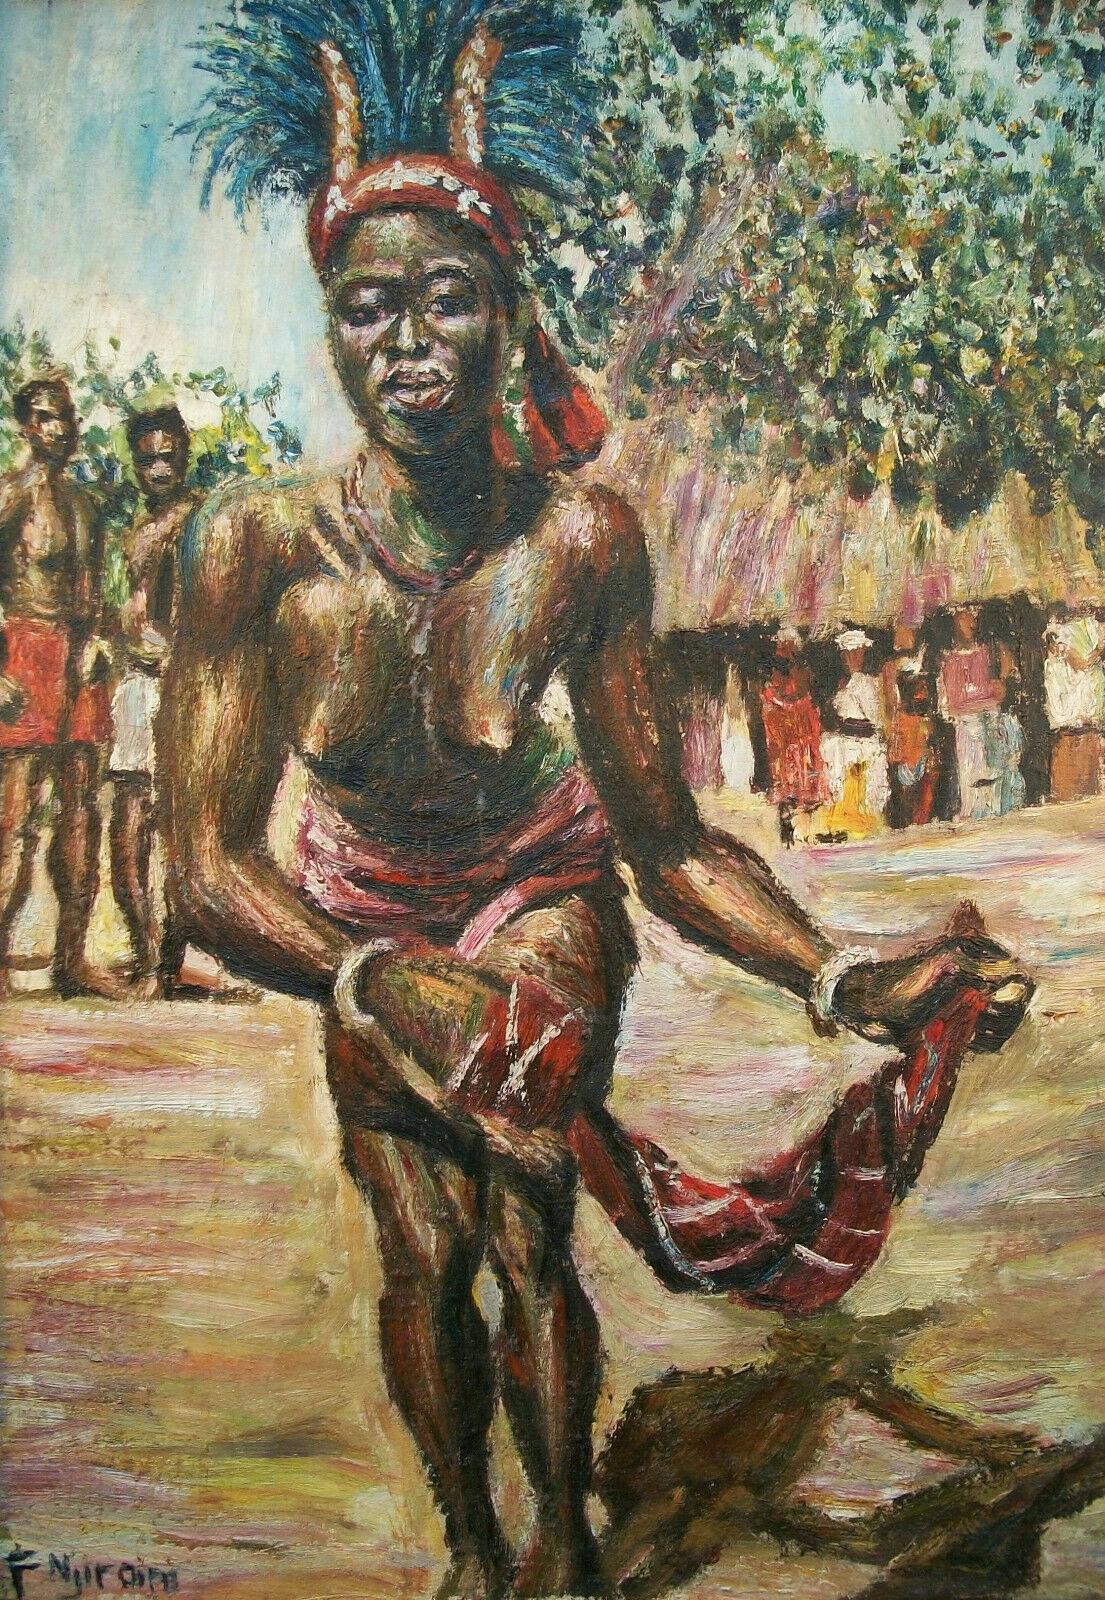 F. NJIRAINI - 'Anger I Go' - mid-century Expressionist oil painting on canvas - signed lower left - titled verso - framed - Kenya - circa 1970's.

Excellent vintage condition - no loss - no damage - no restoration - minor scuffs to the